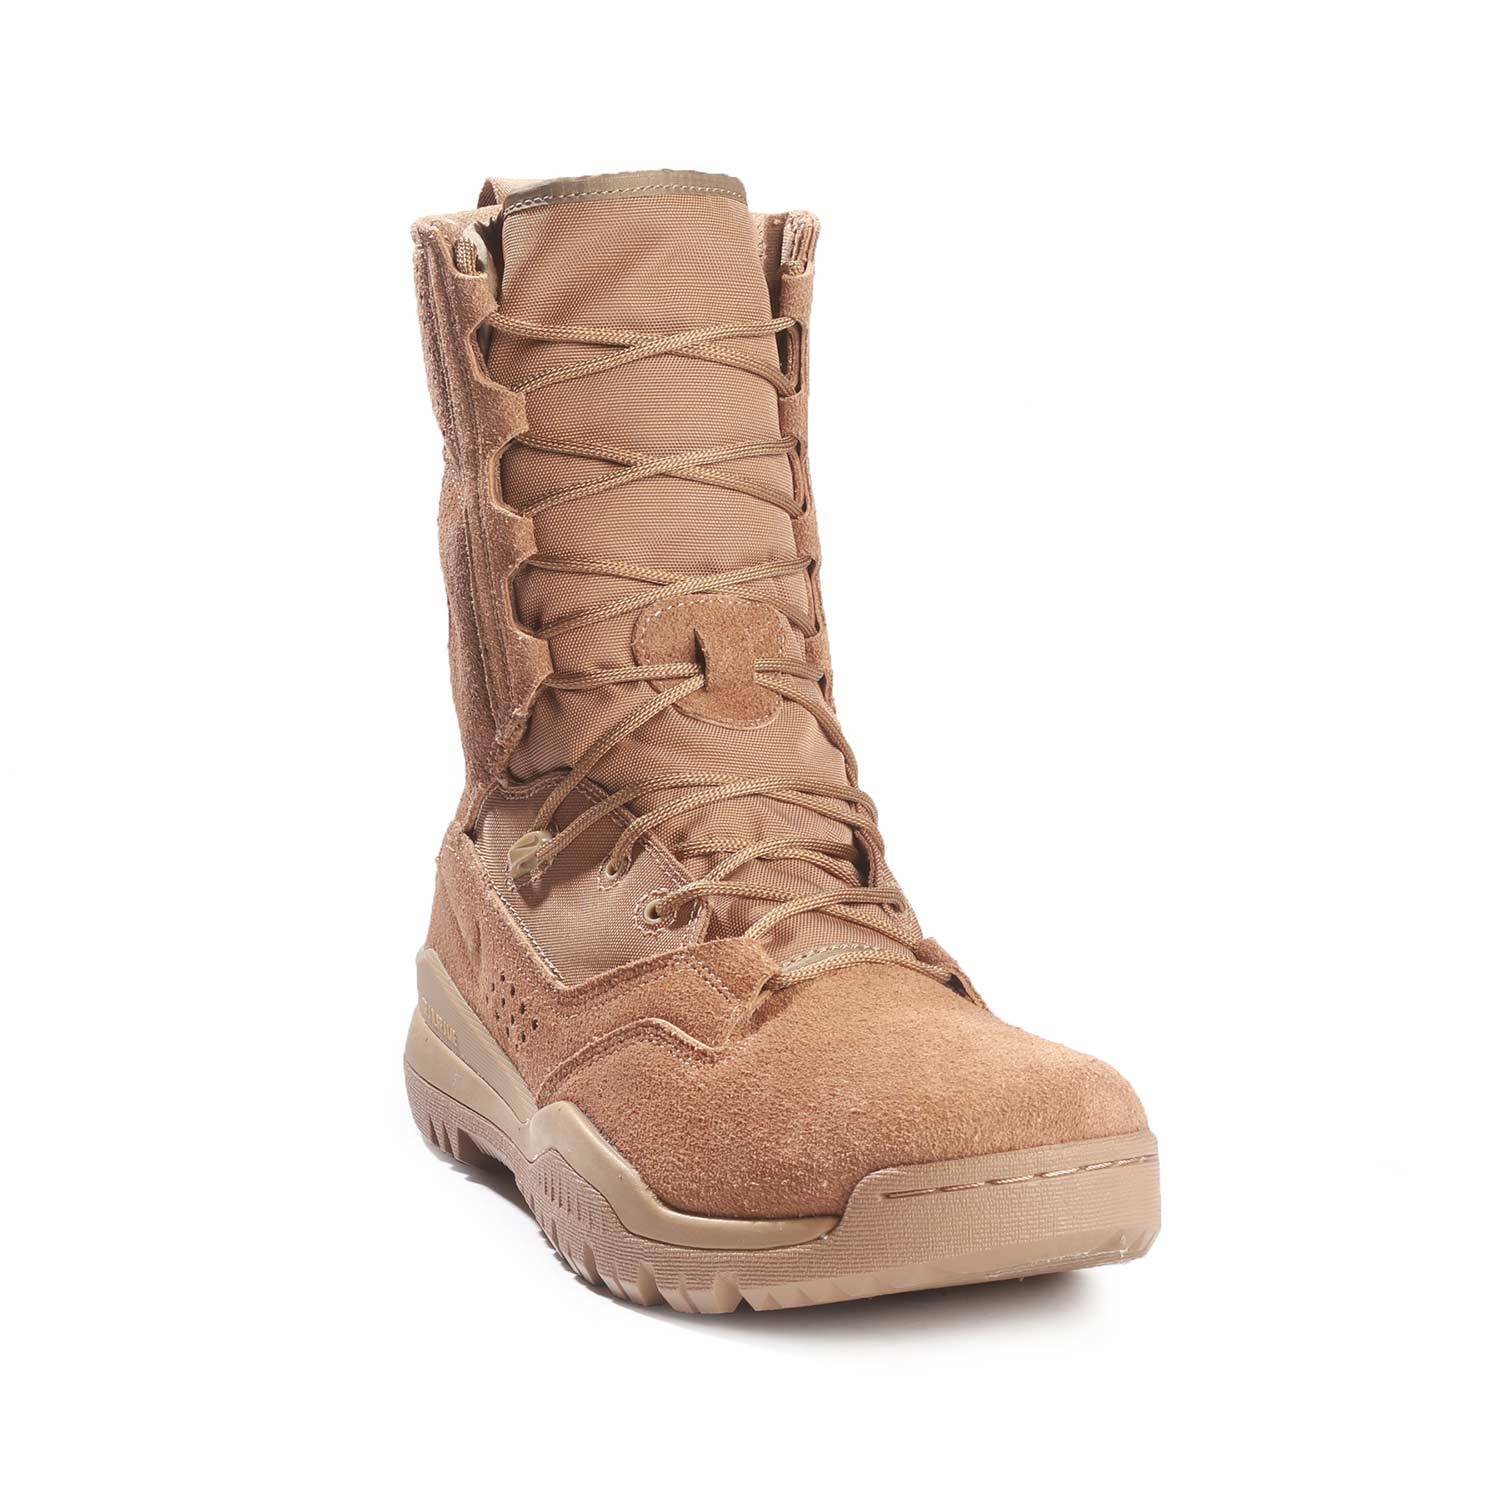 Nike SFB Field 2 8" Tactical Boot